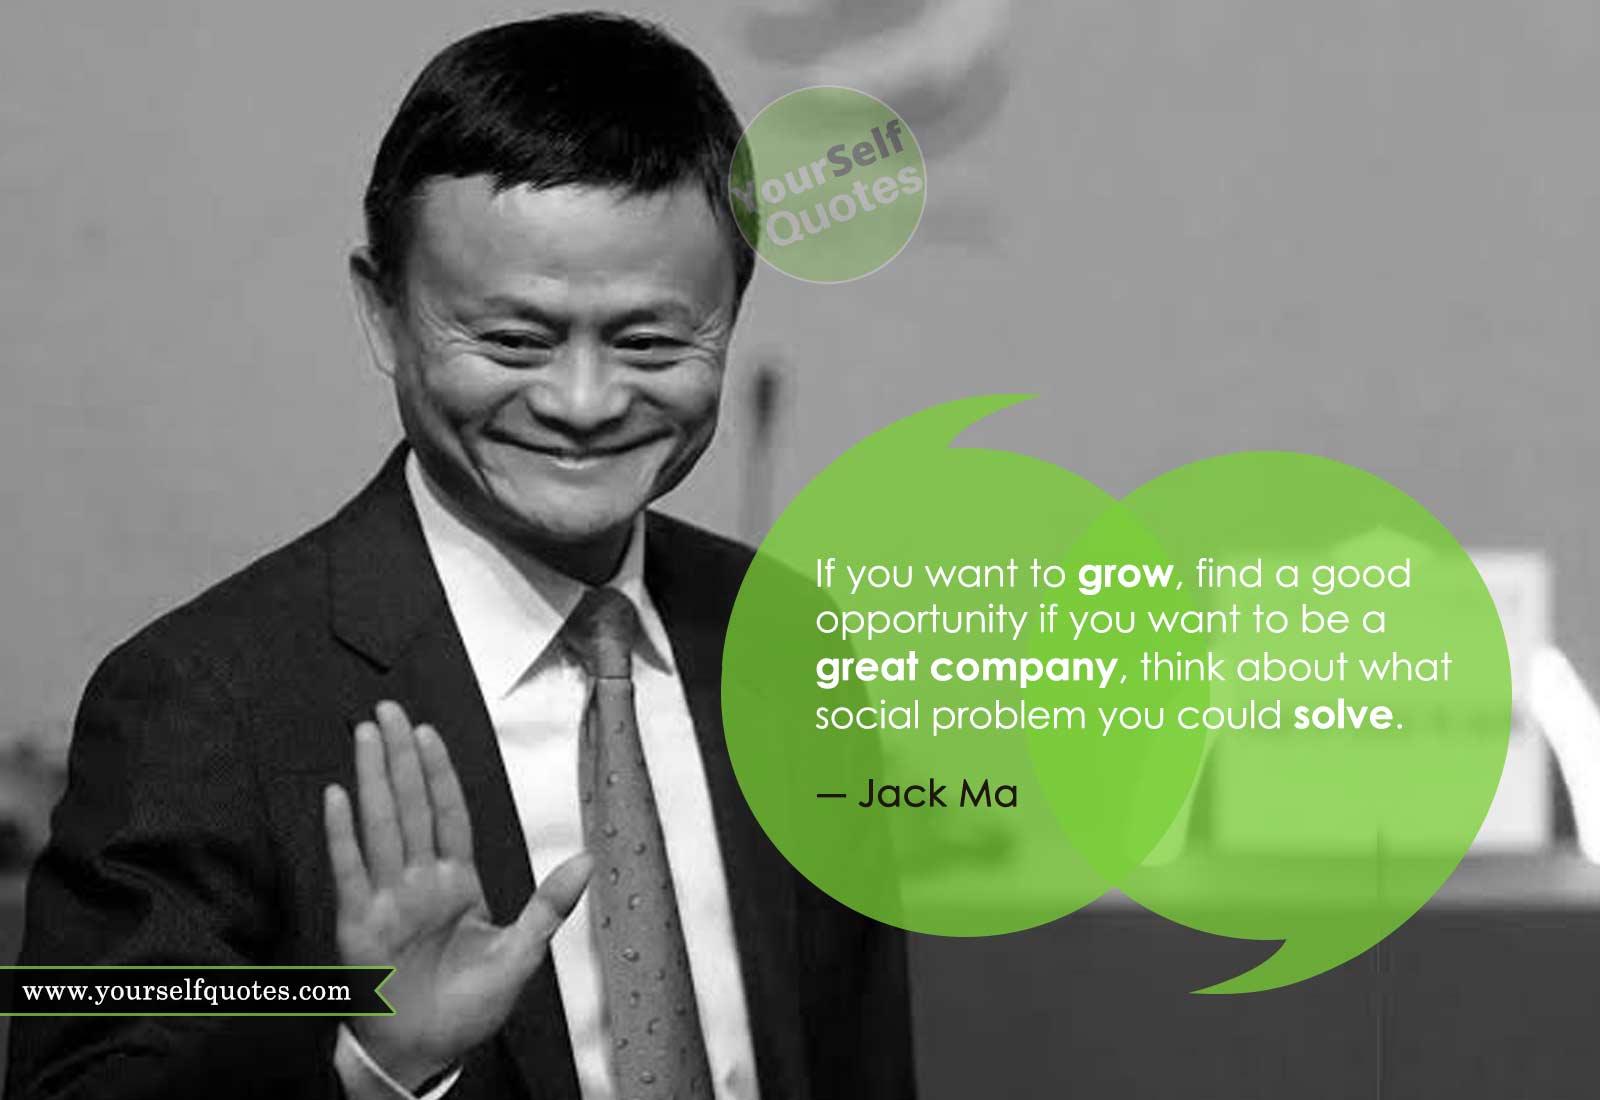 Jack Ma Quotes About Life